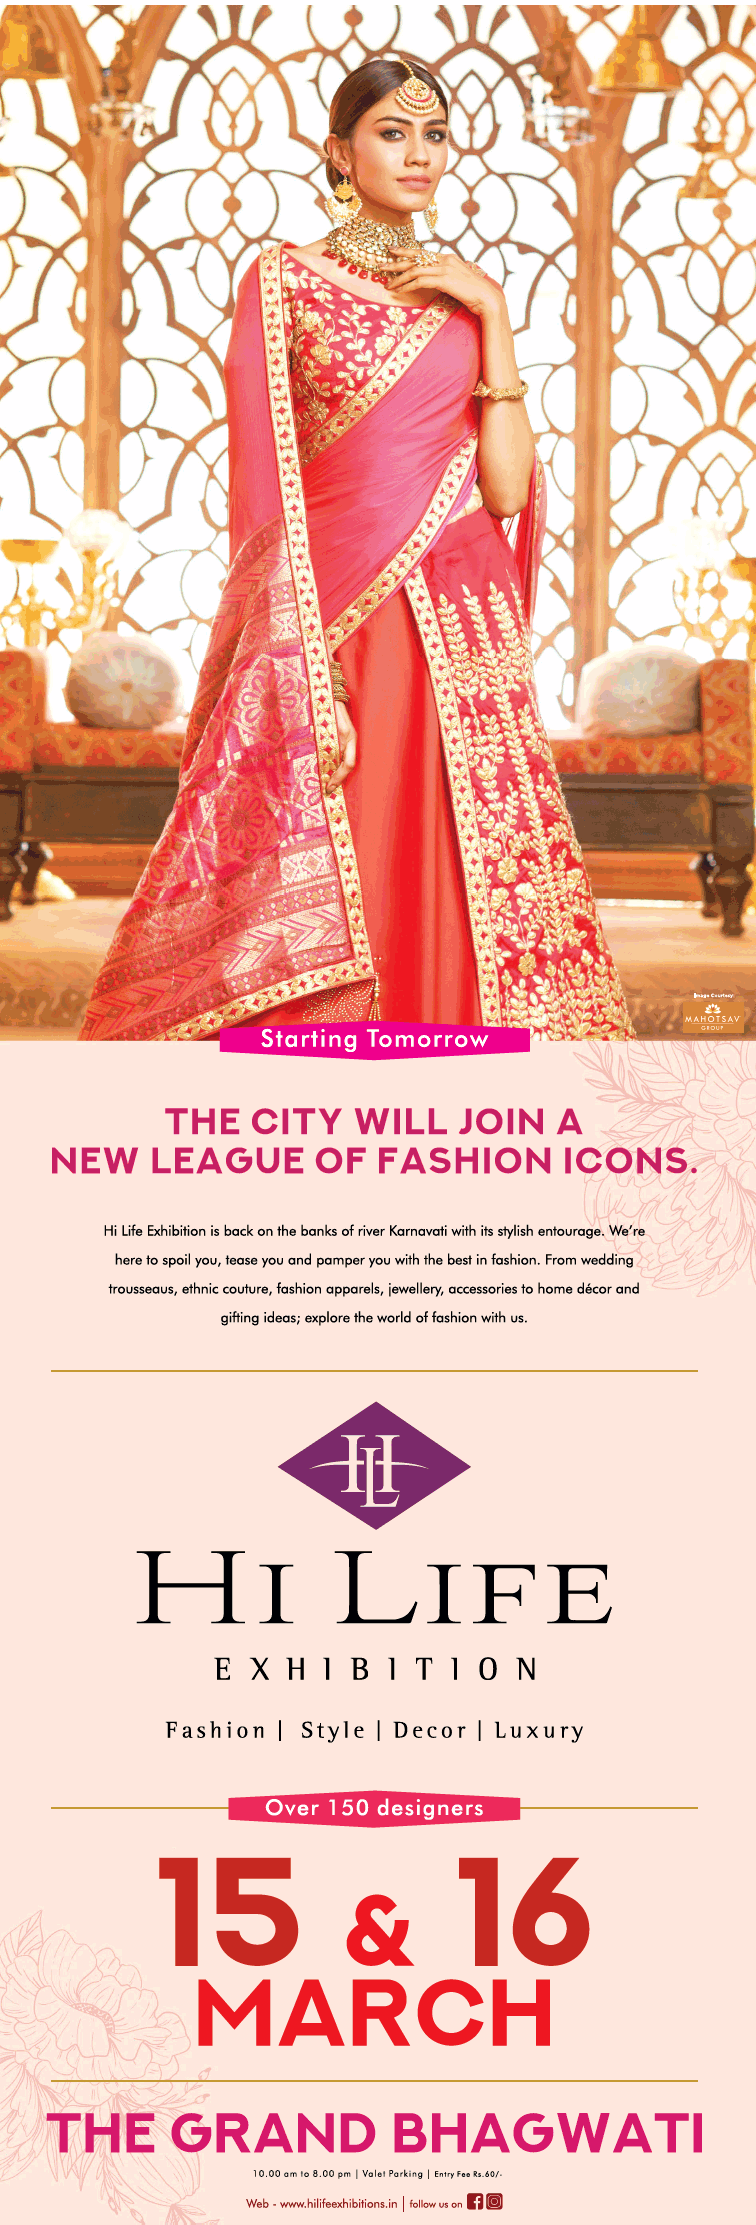 hi-life-exhibition-the-city-will-join-a-new-league-of-fashion-icons-ad-ahmedabad-times-14-03-2019.png